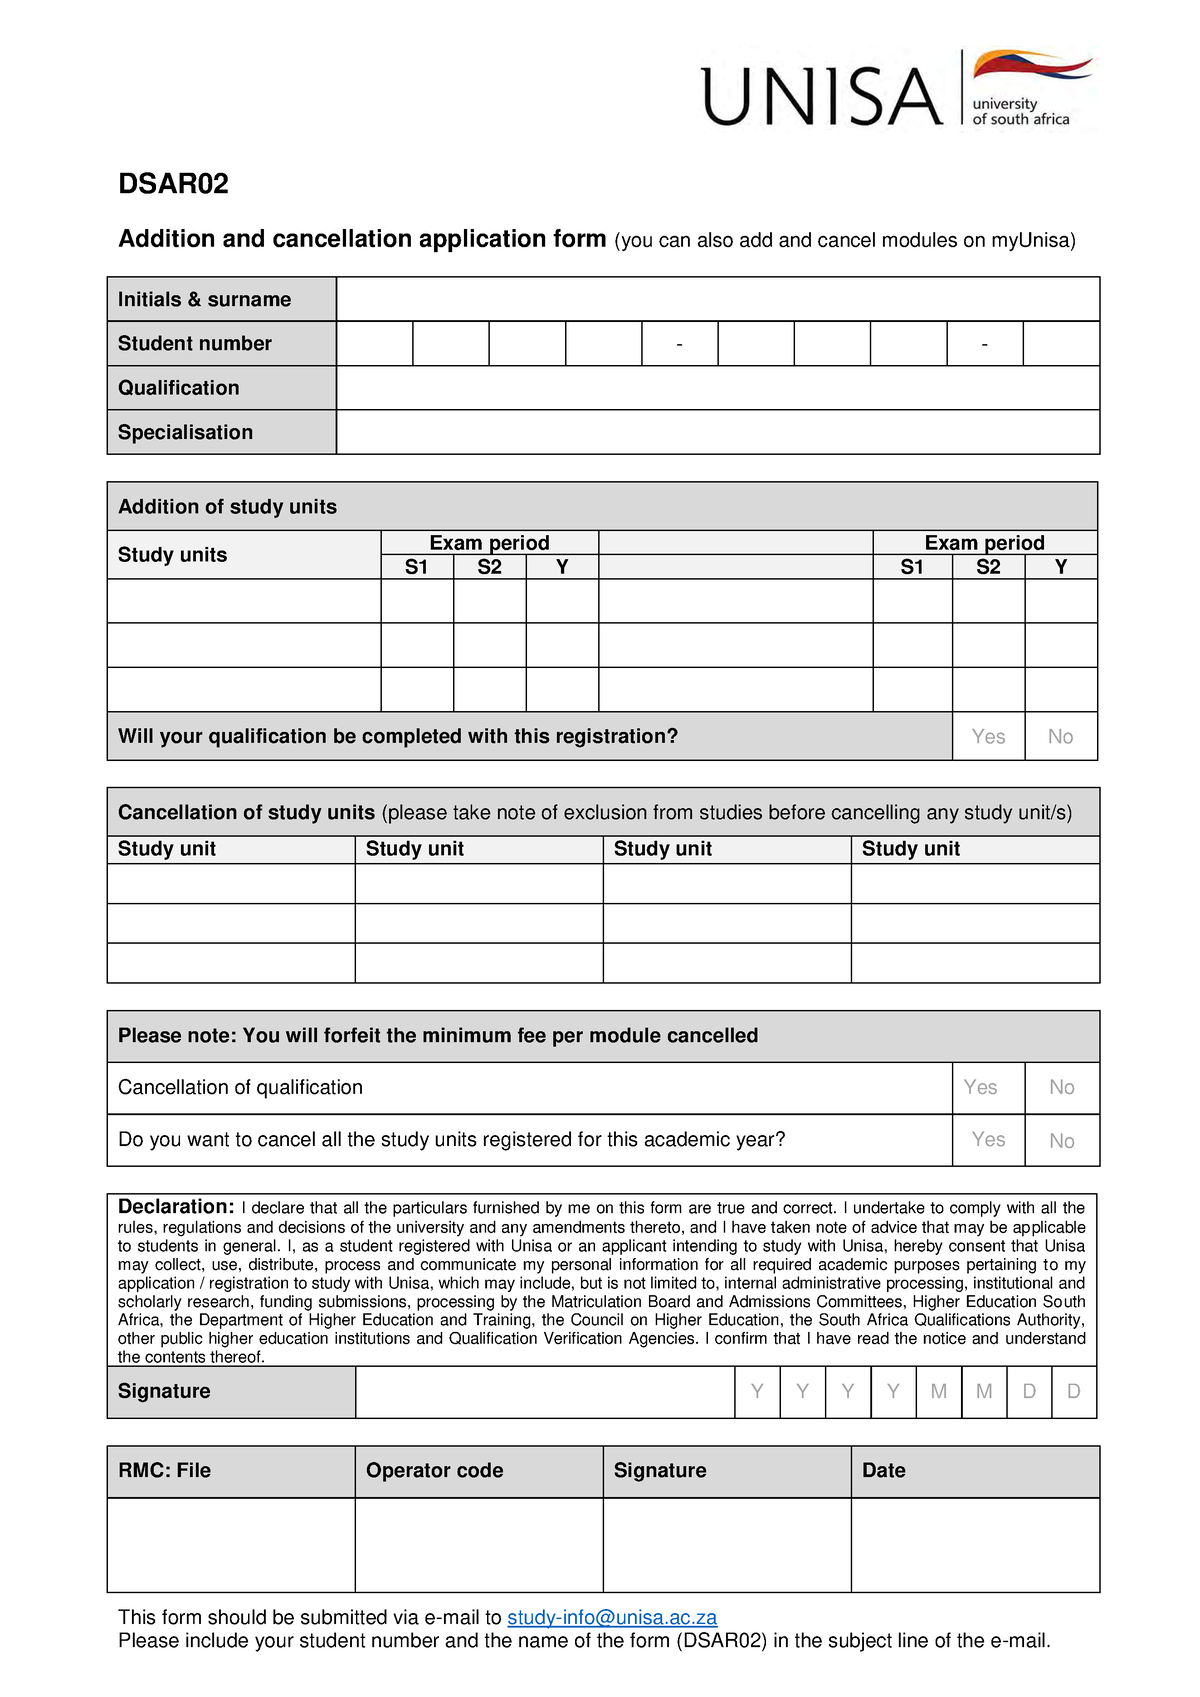 UnisaDSAR02form Yes DSAR02 Addition and cancellation application